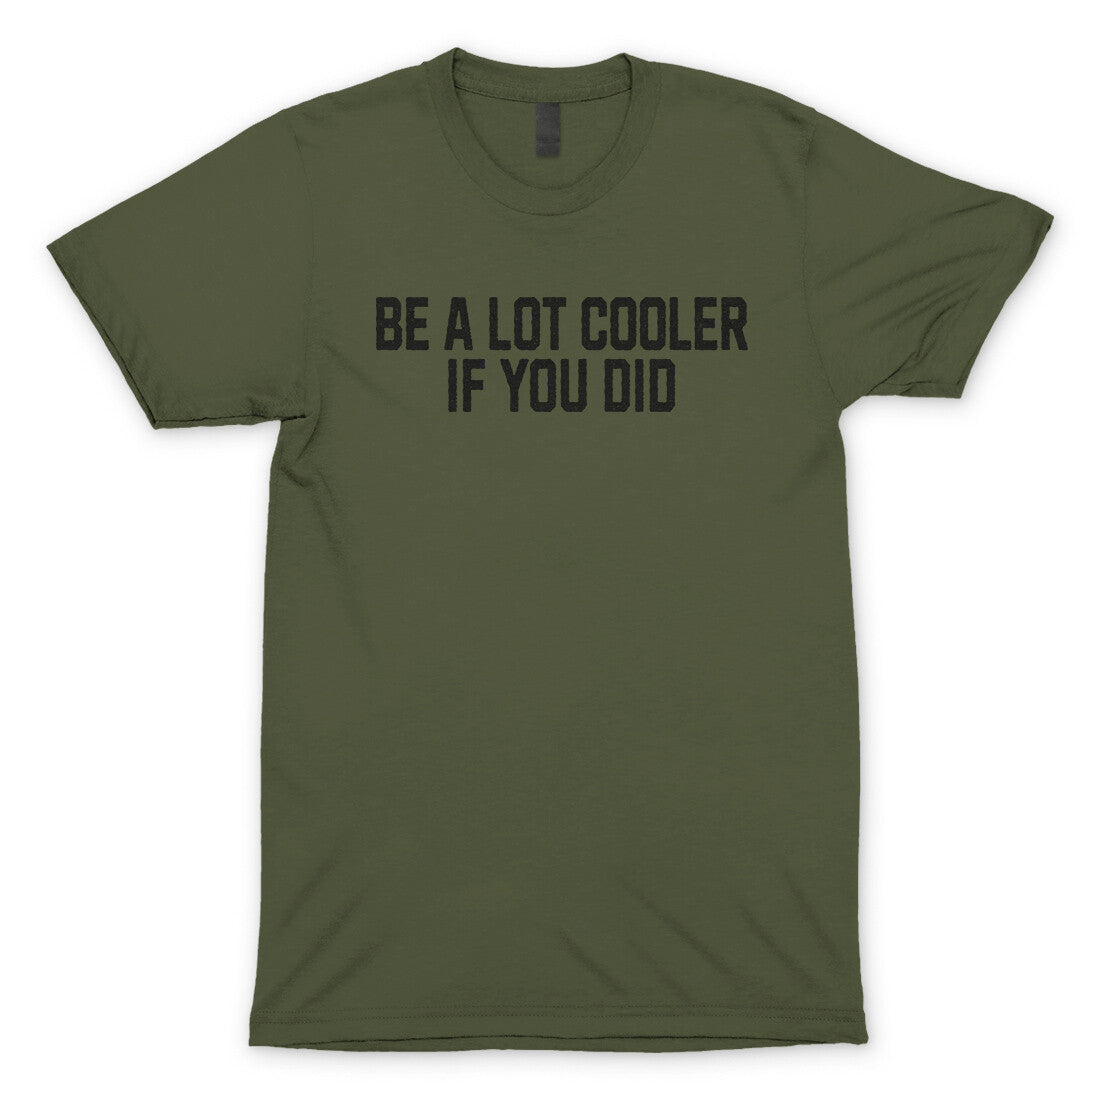 Be a Lot Cooler if you Did in Military Green Color